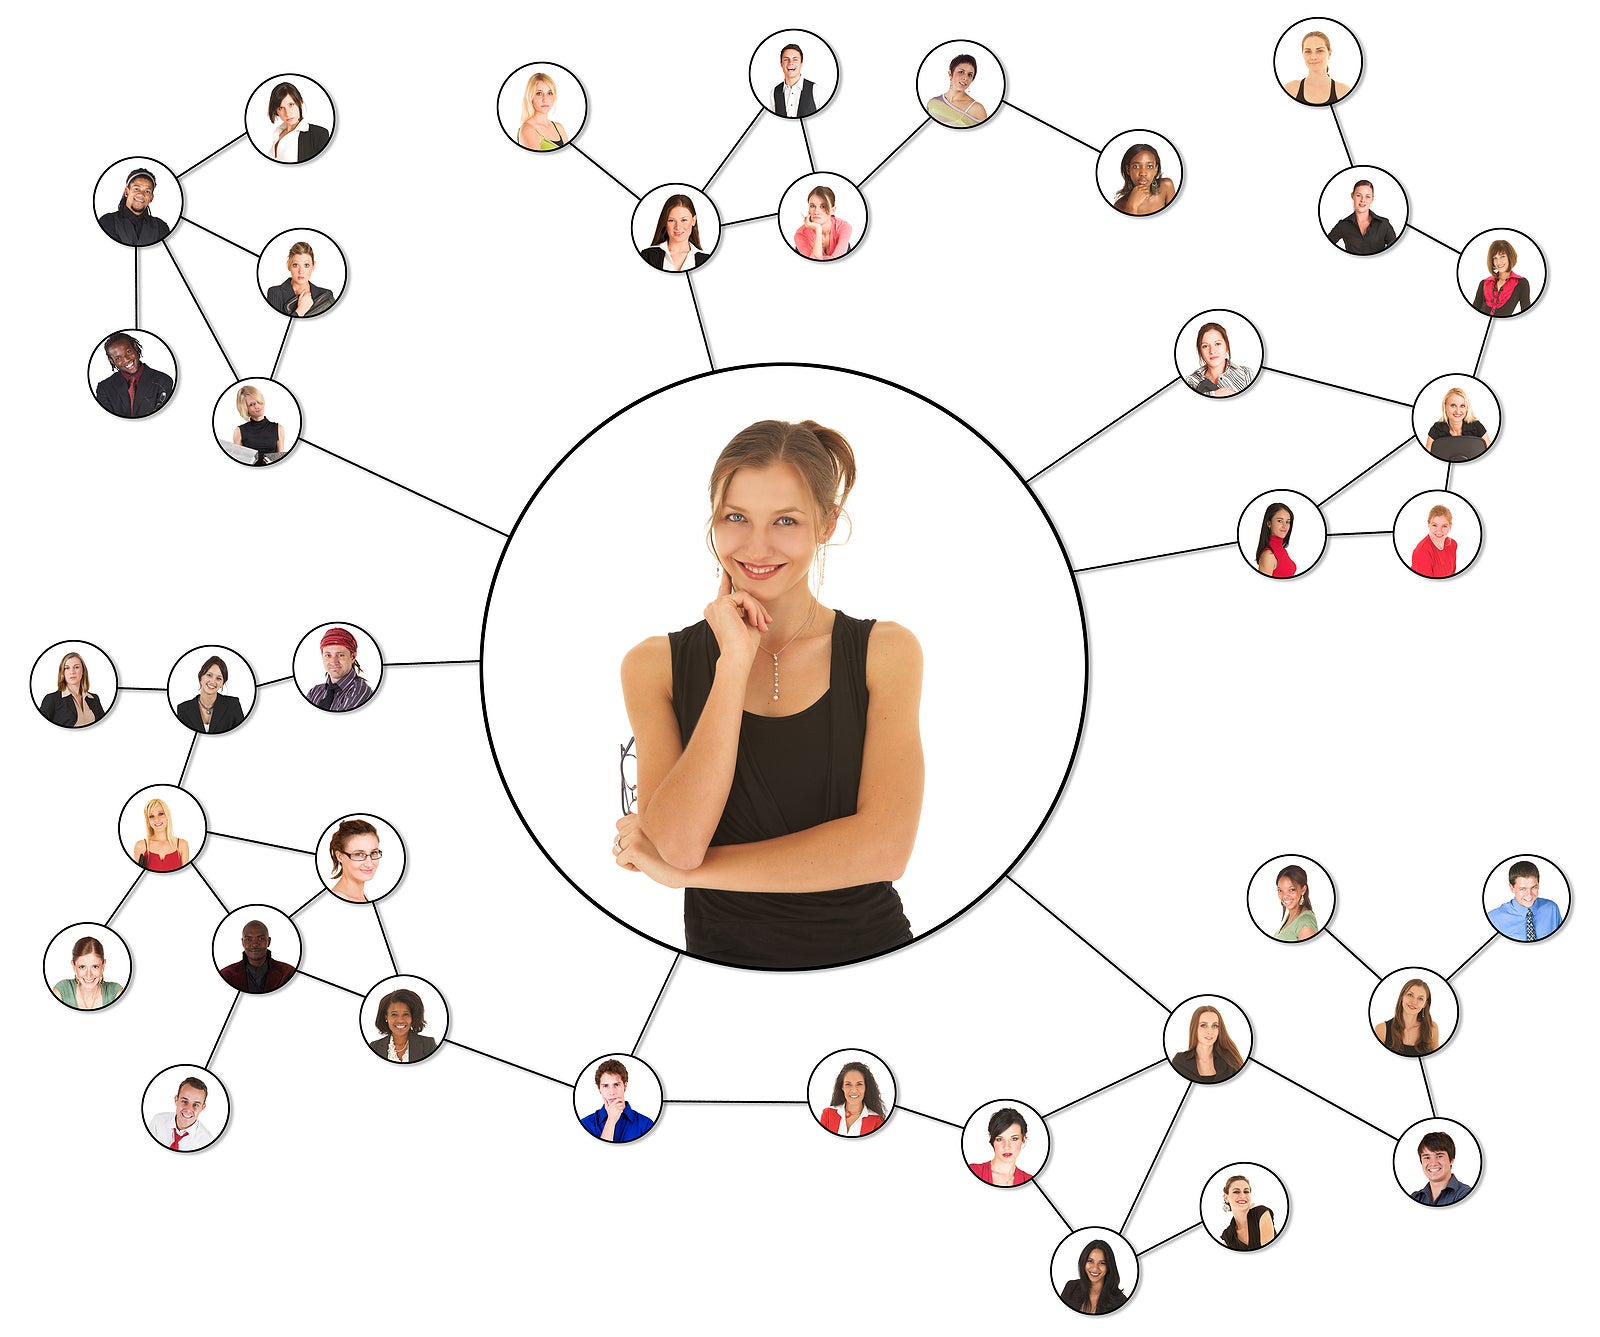 Linking grid of the social network of a young adult Caucasian woman